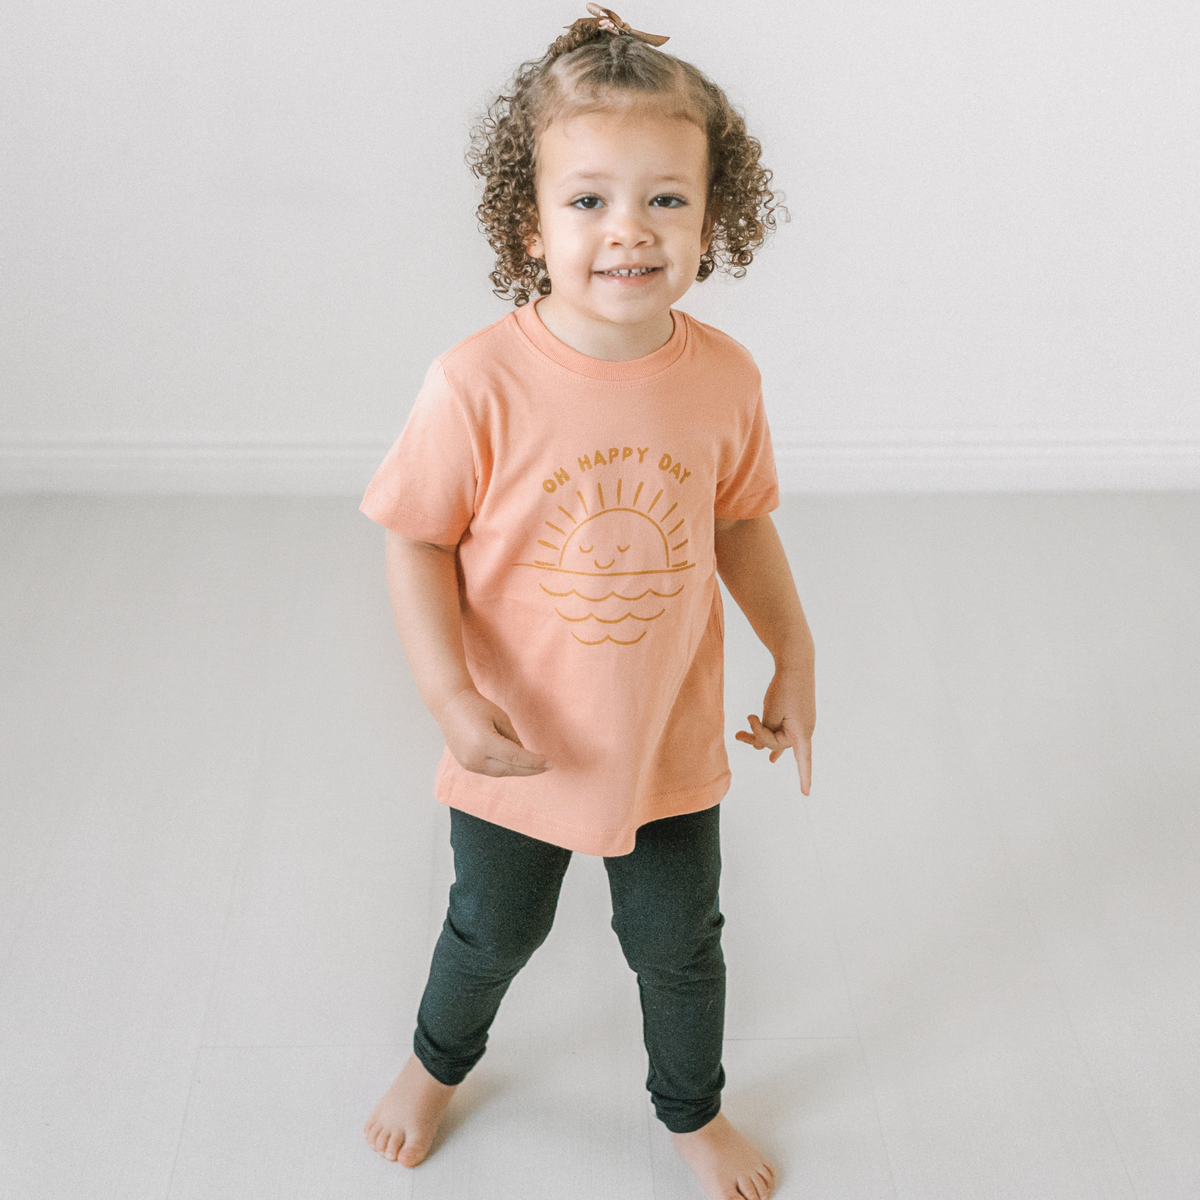 Oh Happy Day Toddler T-Shirt